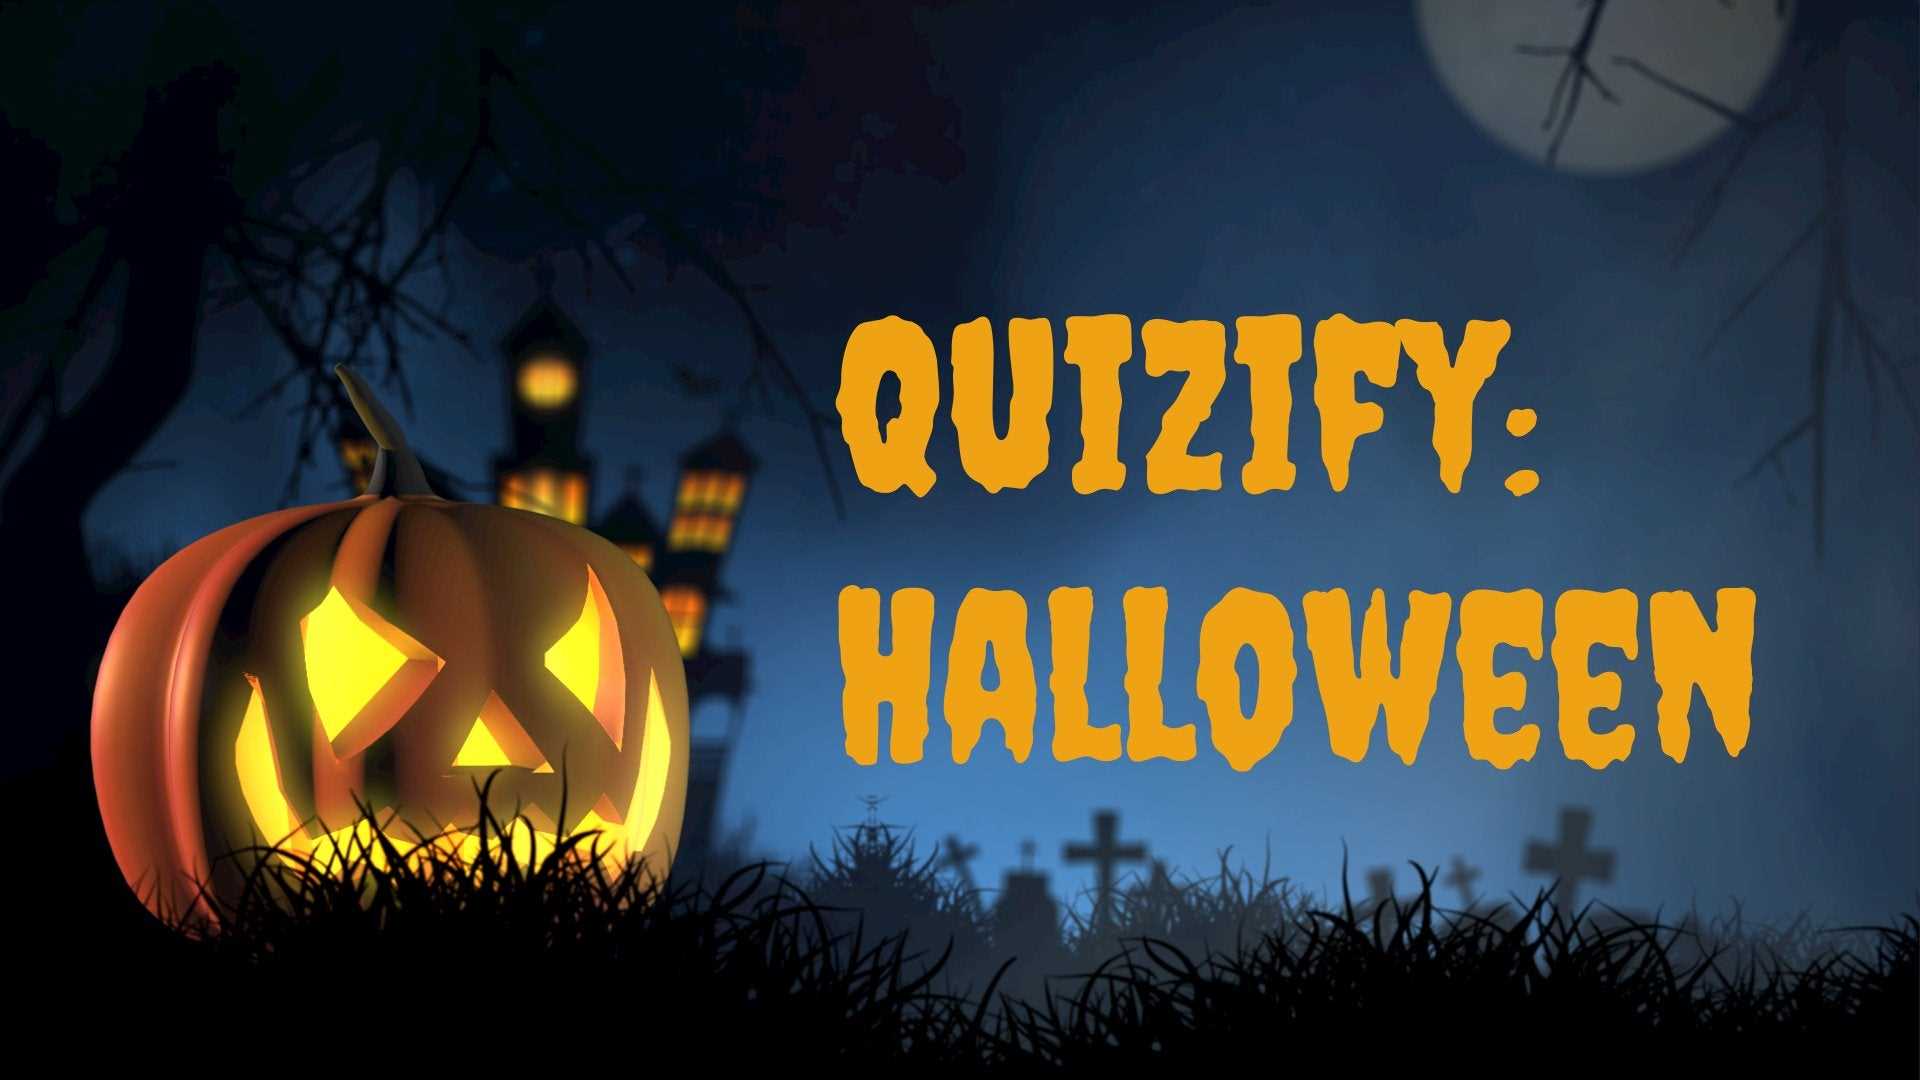 Quizify: Halloween - Quizify